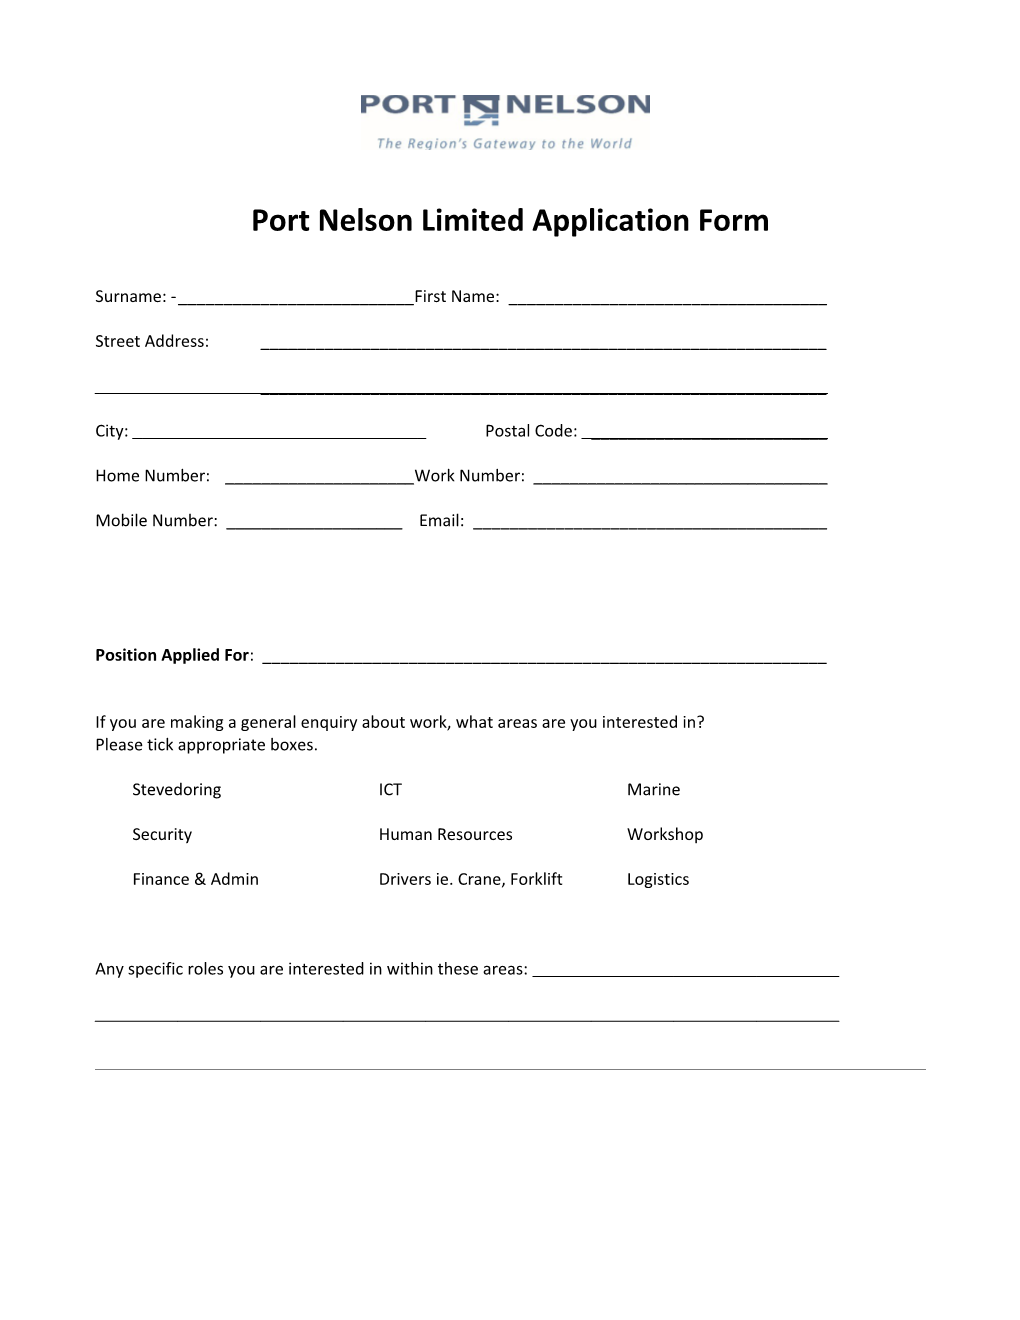 Port Nelson Limited Application Form